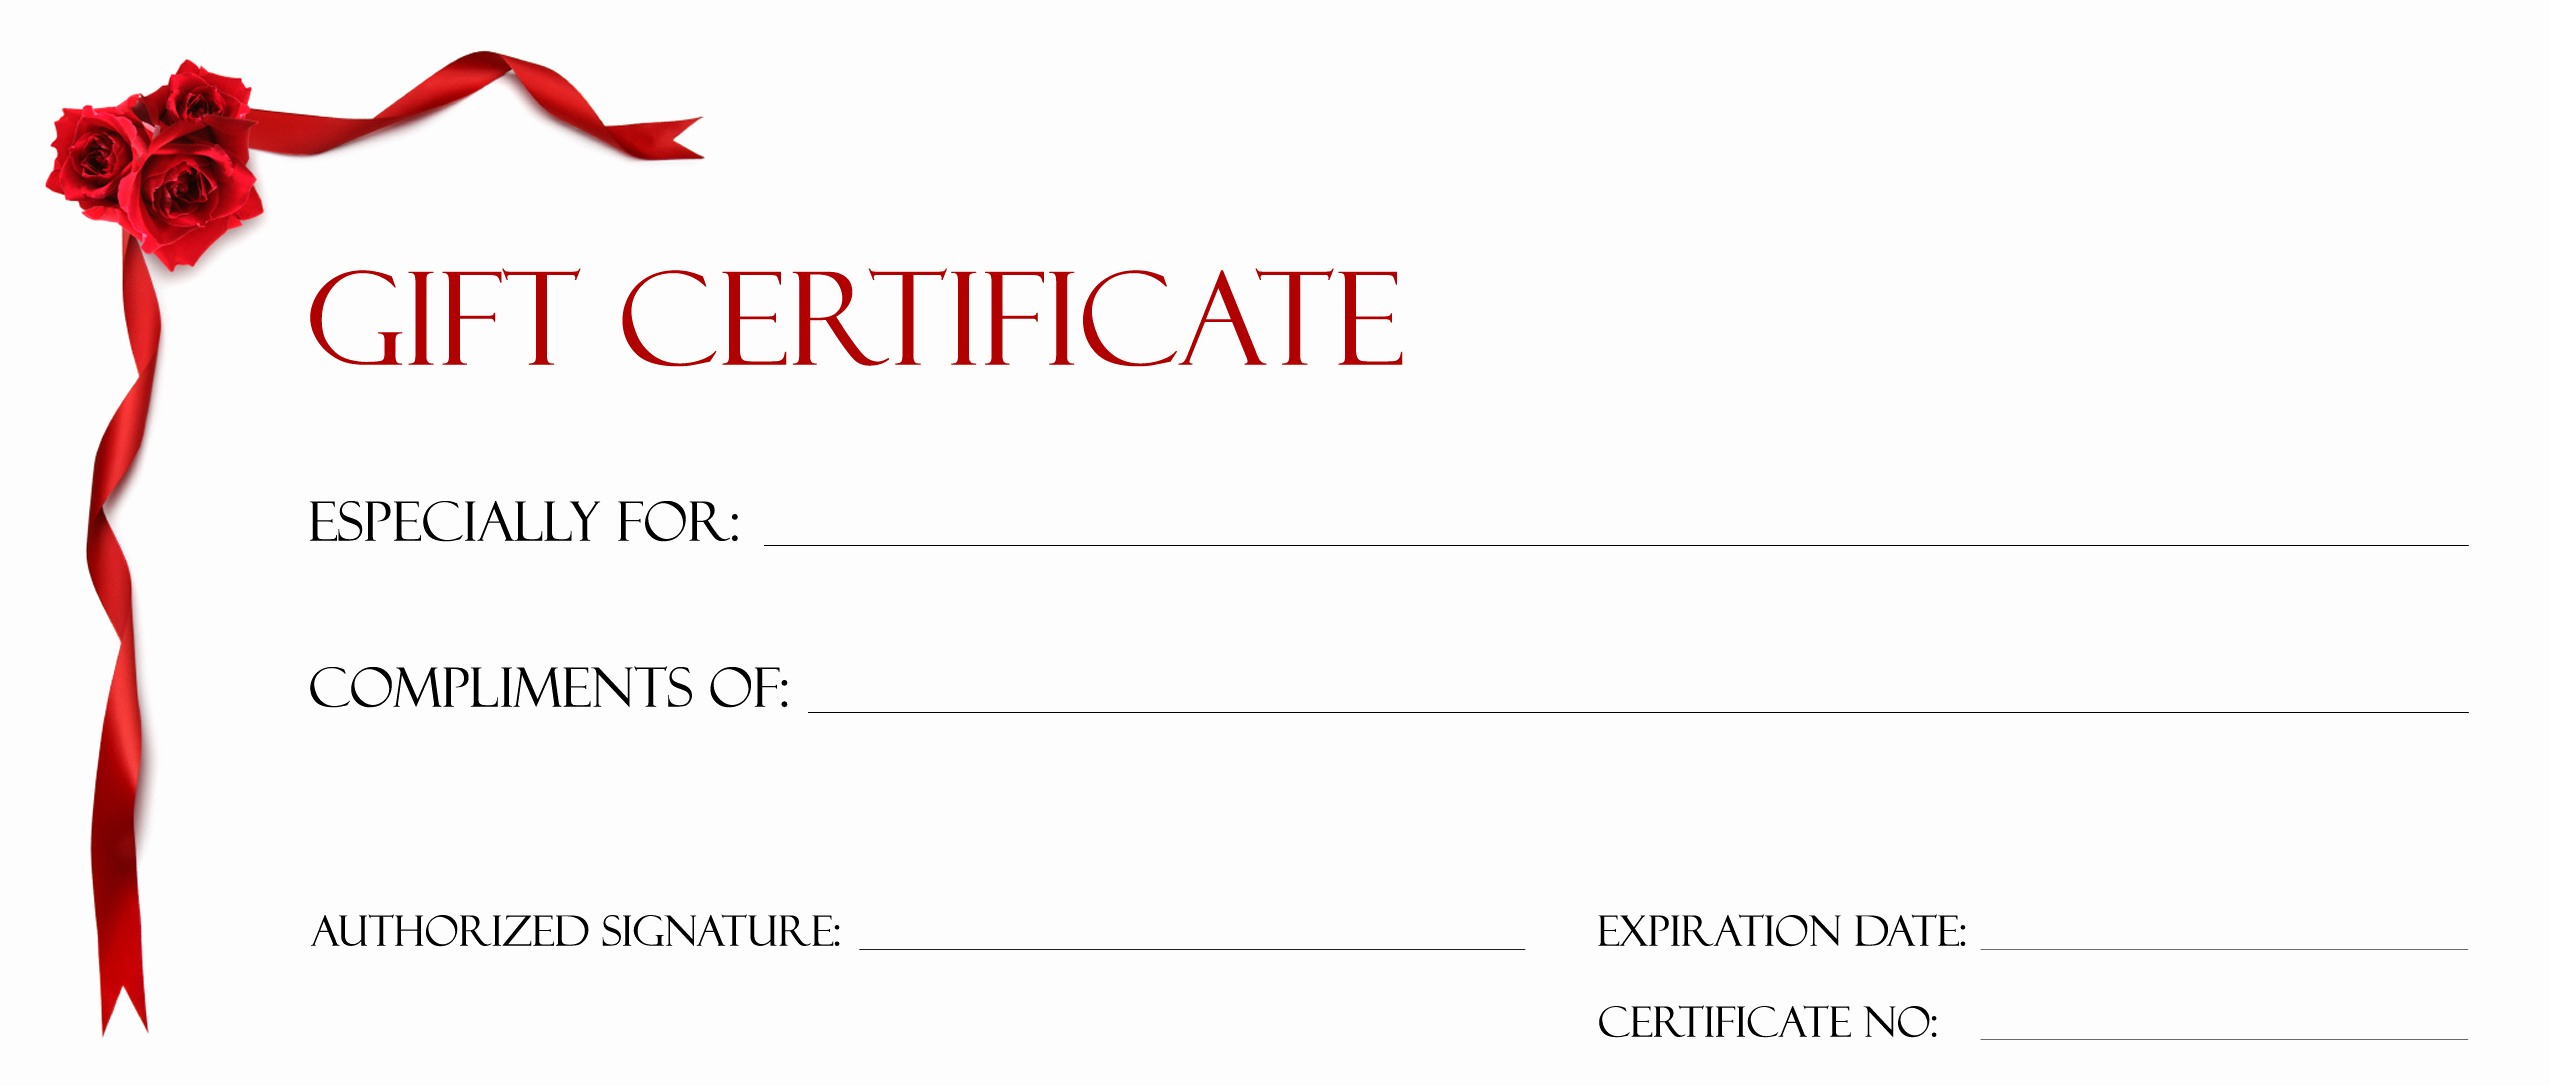 Google Docs Gift Certificate Template New Gift Certificate Make Your Own